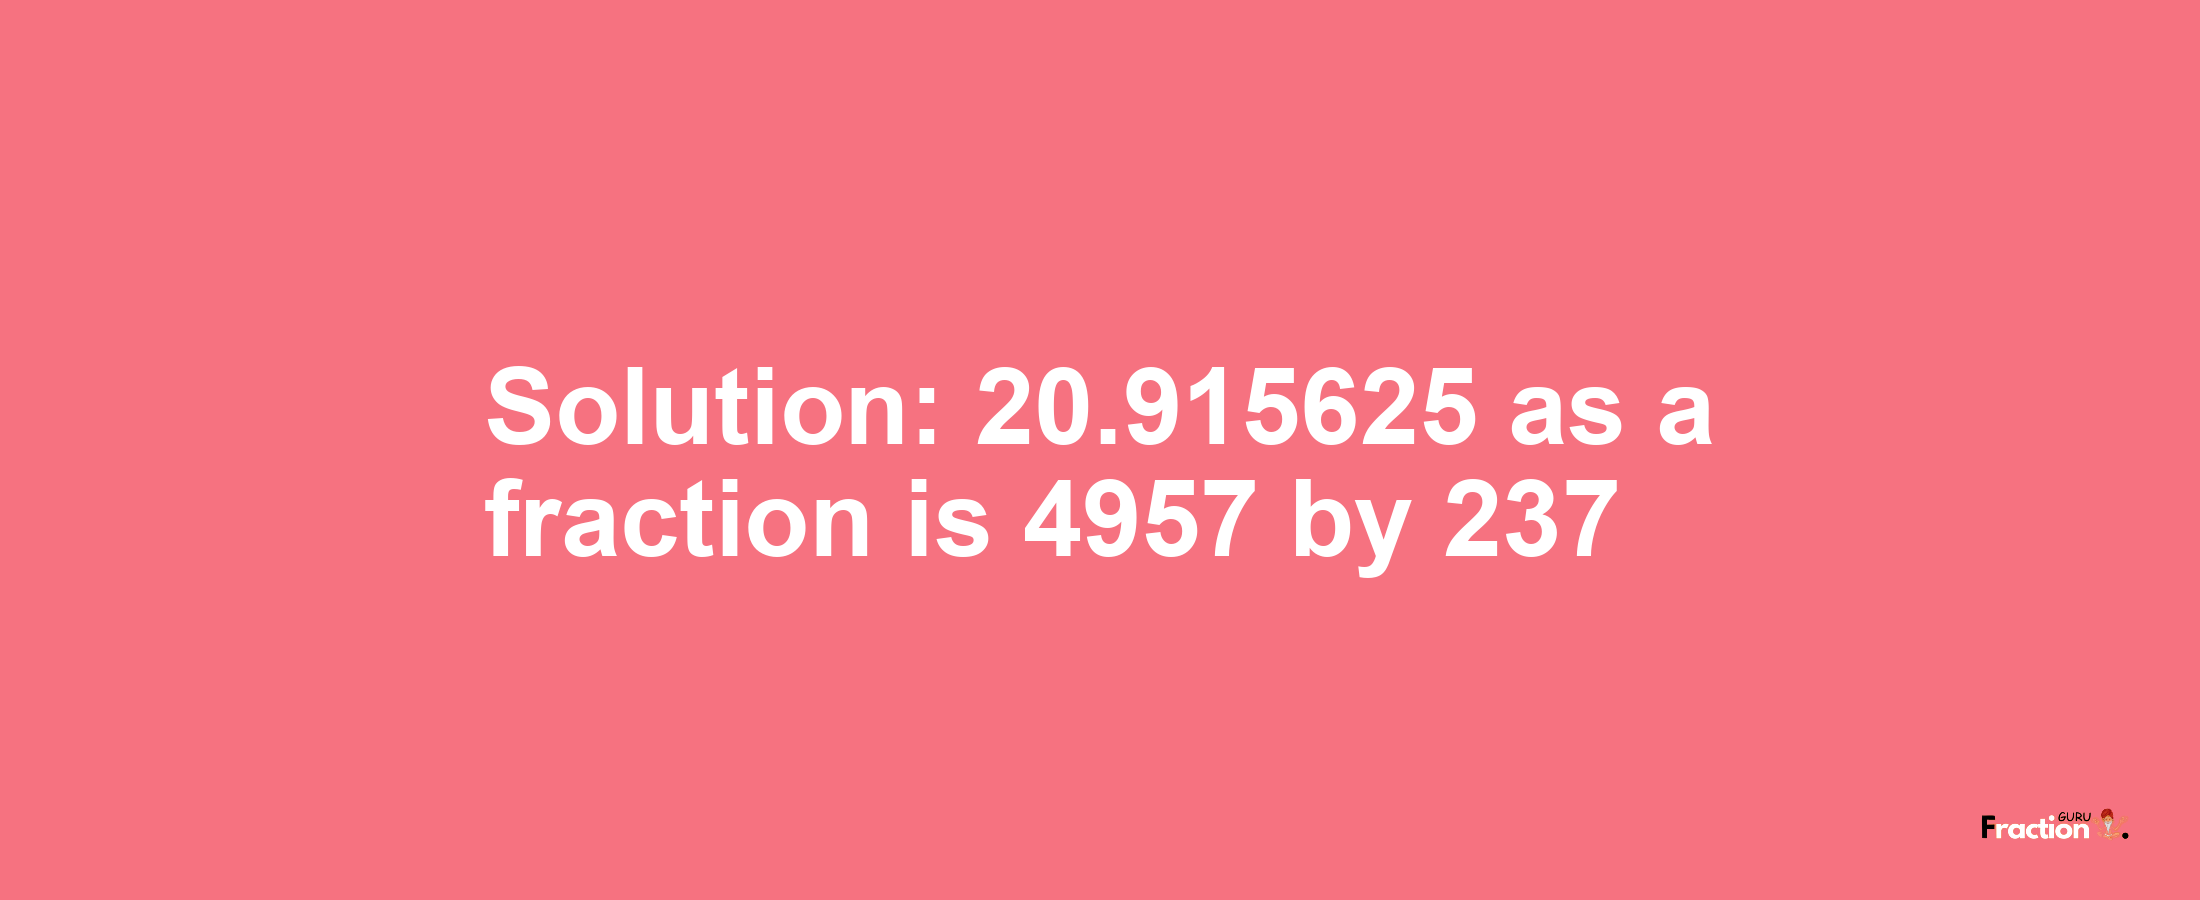 Solution:20.915625 as a fraction is 4957/237